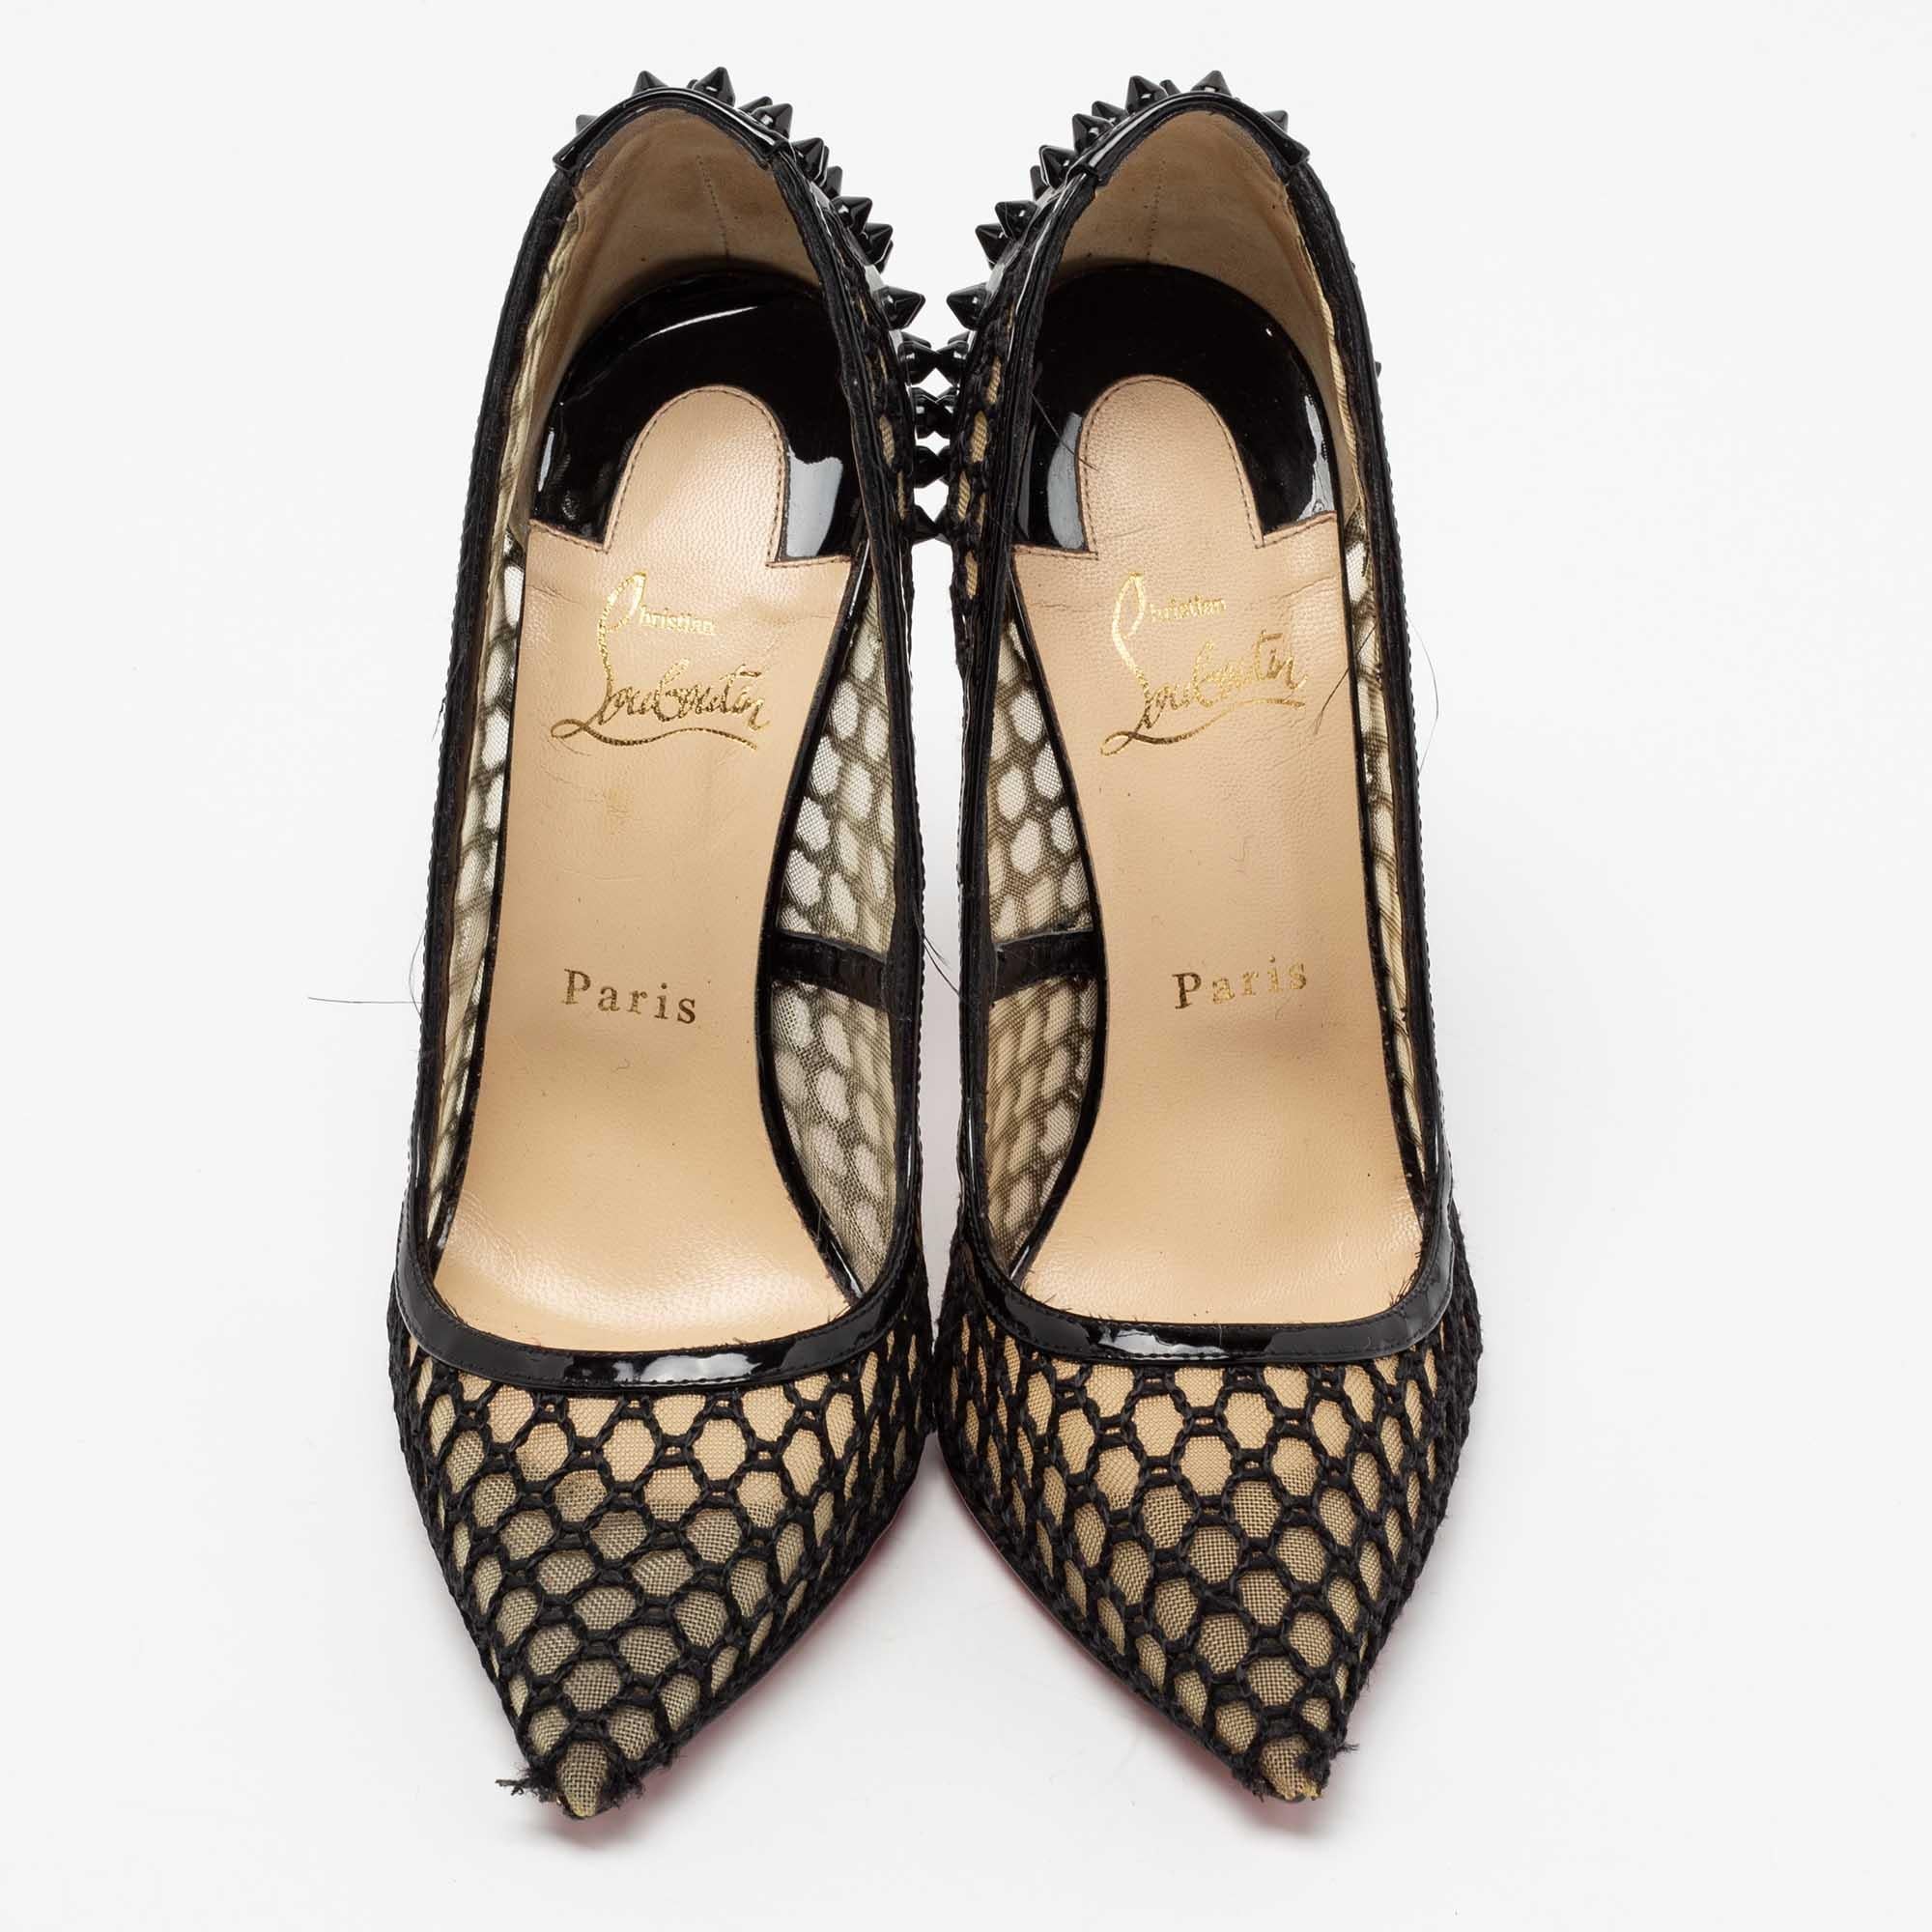 This pair of Christian Louboutin pumps is designed to offer you an elevated style. Created from lace and patent leather, the studs at the back makes it undeniably chic, and its 12cm heels will instantly update your outfit. The signature